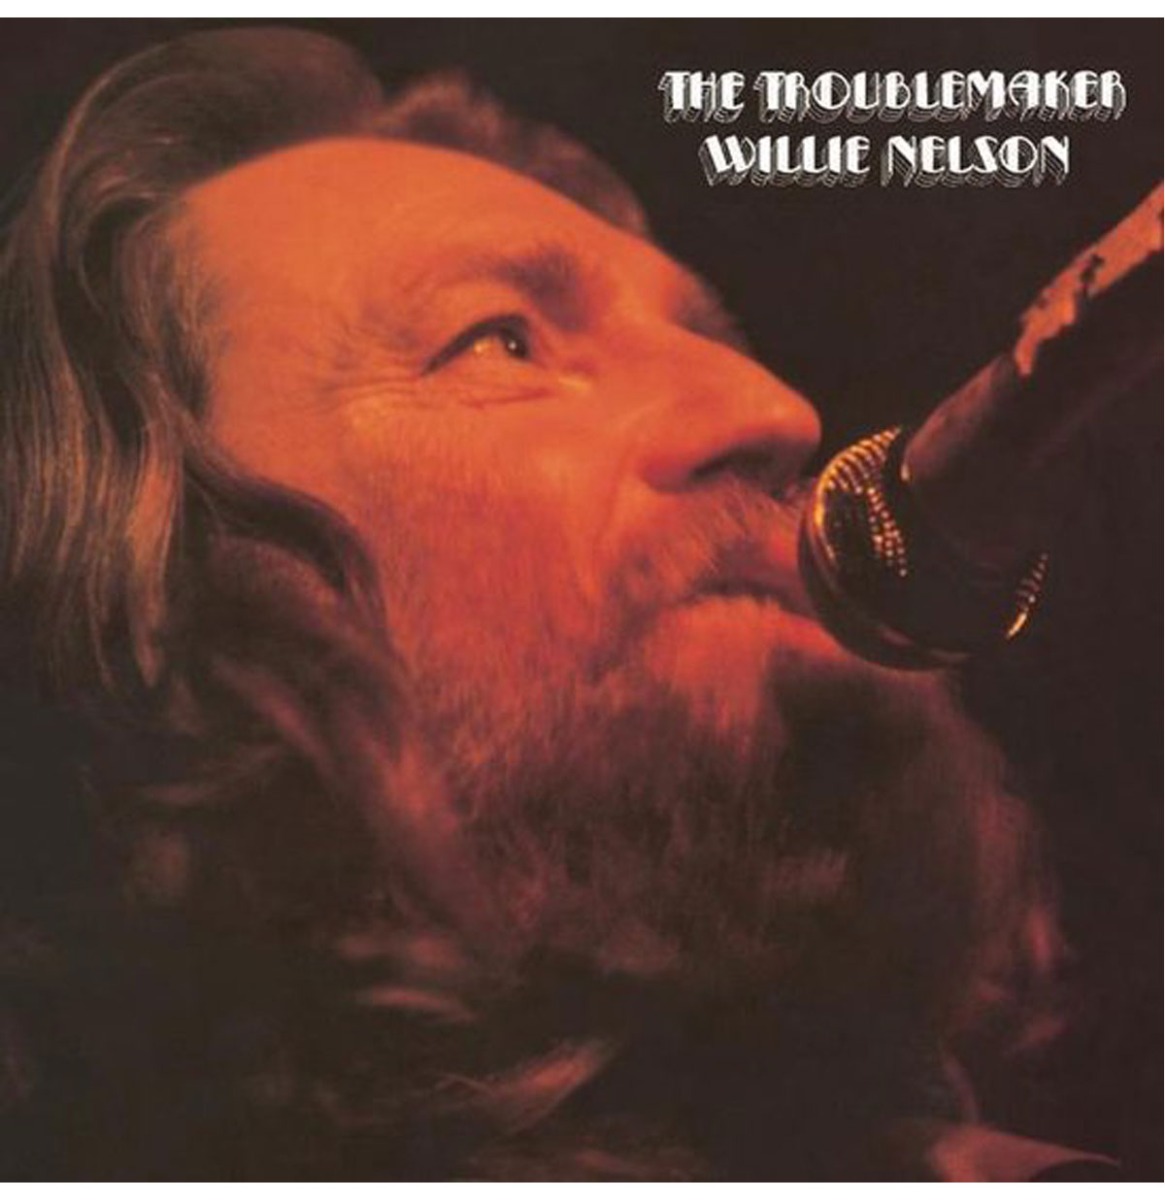 Willie Nelson - The Troublemaker LP